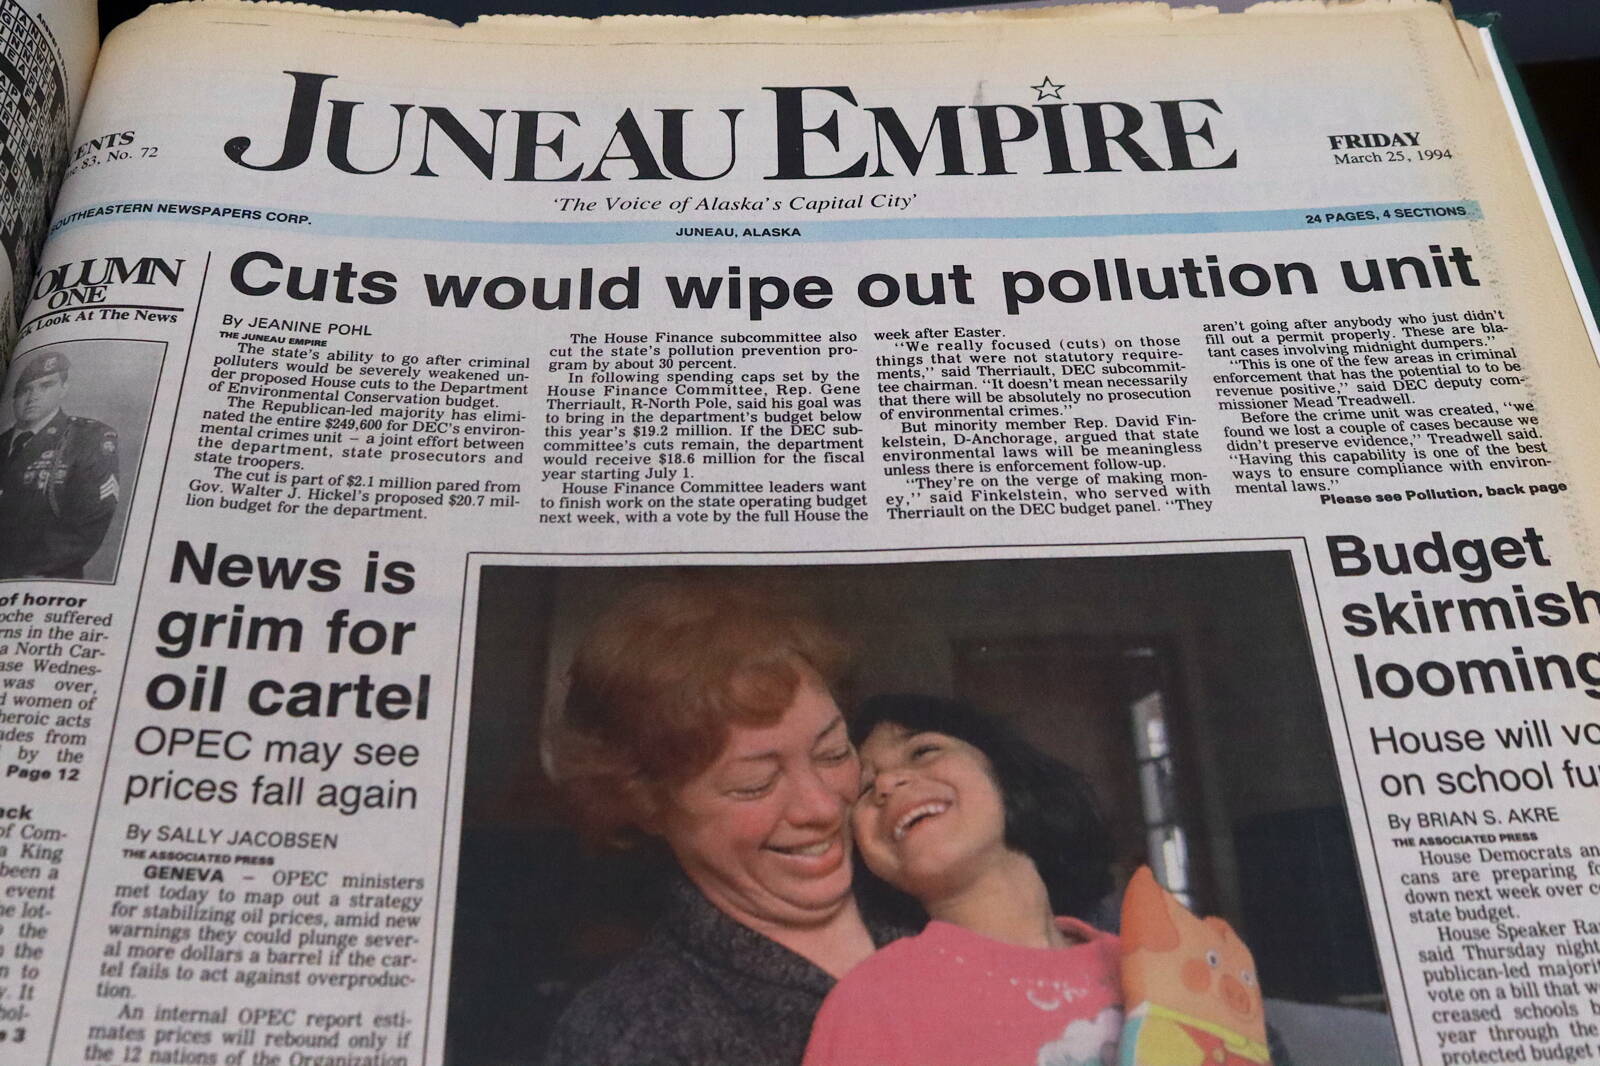 The front page of the Juneau Empire on March 25, 1994. (Mark Sabbatini / Juneau Empire)